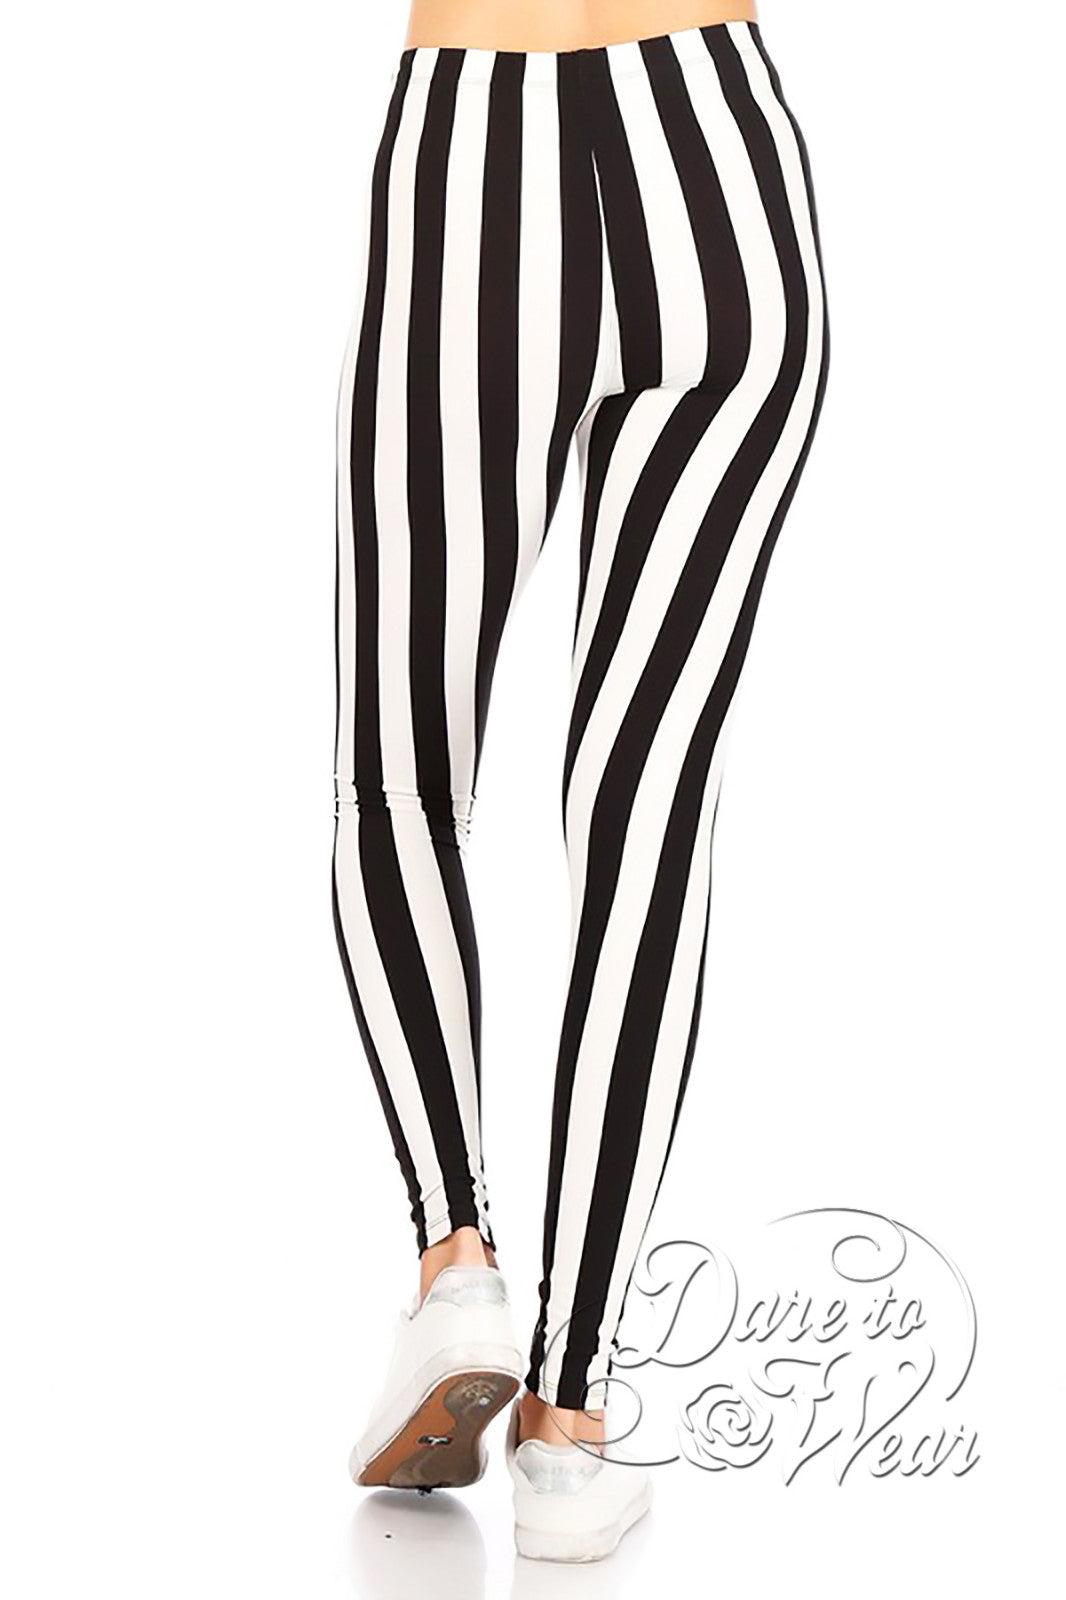 Wholesale Buttery Smooth Vertical Black Pinstripe Leggings